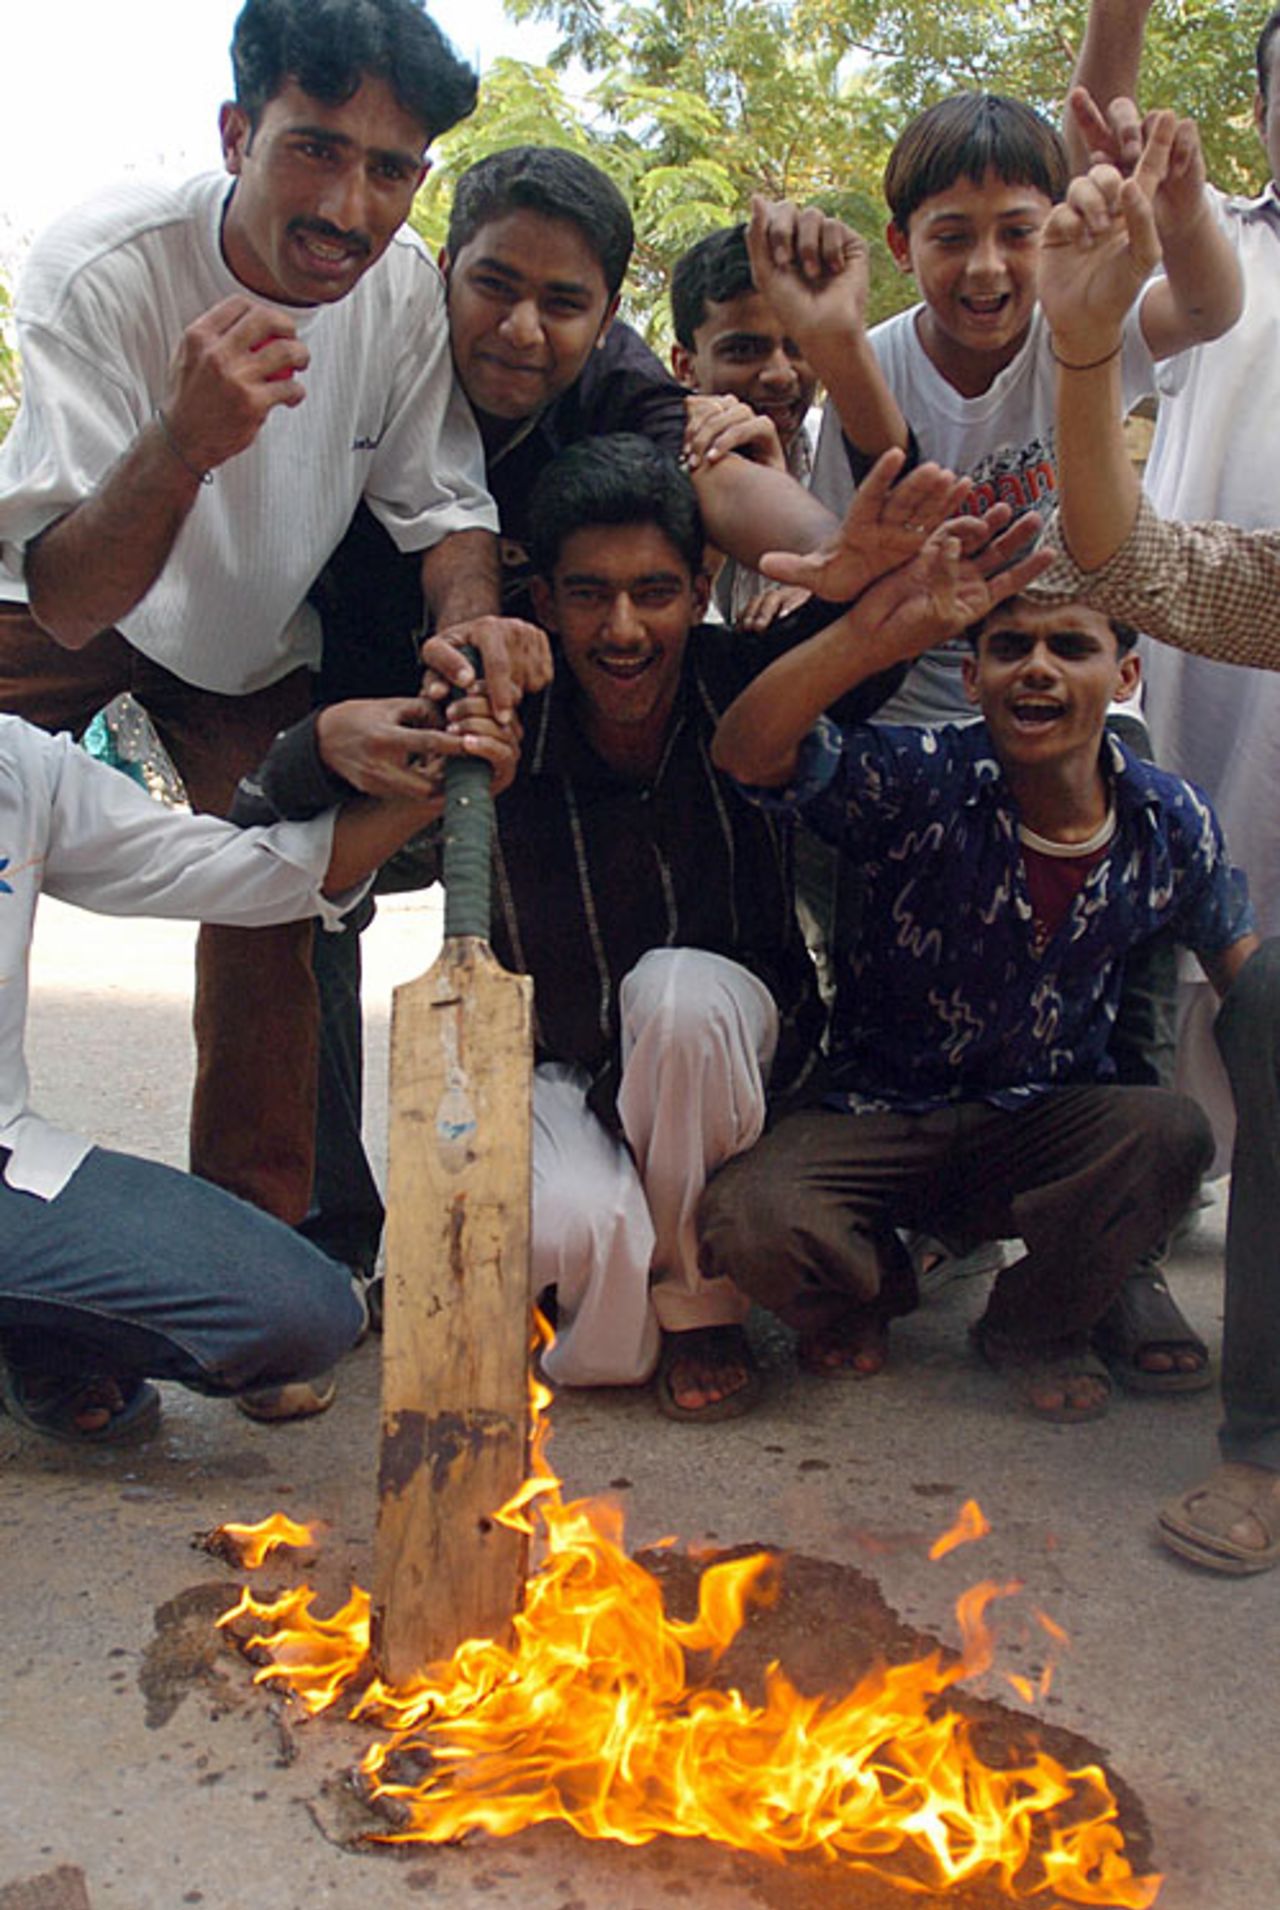 Pakistan cricket fans burn a bat in protest at their side's dismal World Cup performance, Karachi, March 18, 2007